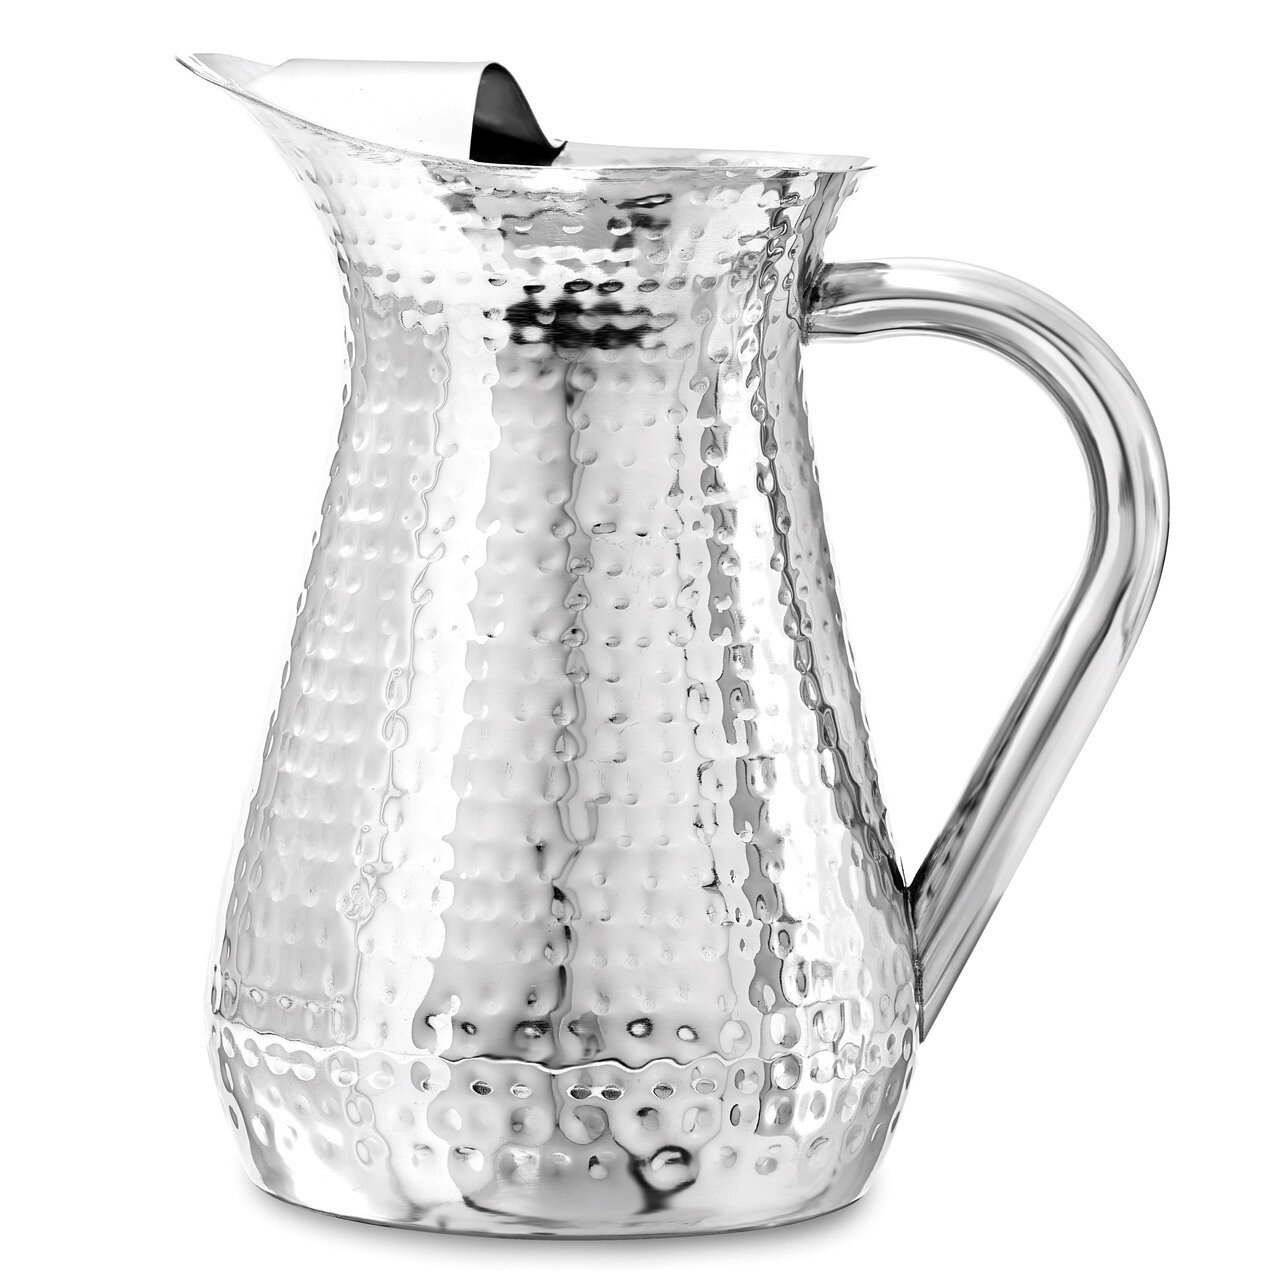 48 oz Hammered Stainless Steel Water Pitcher GM6861